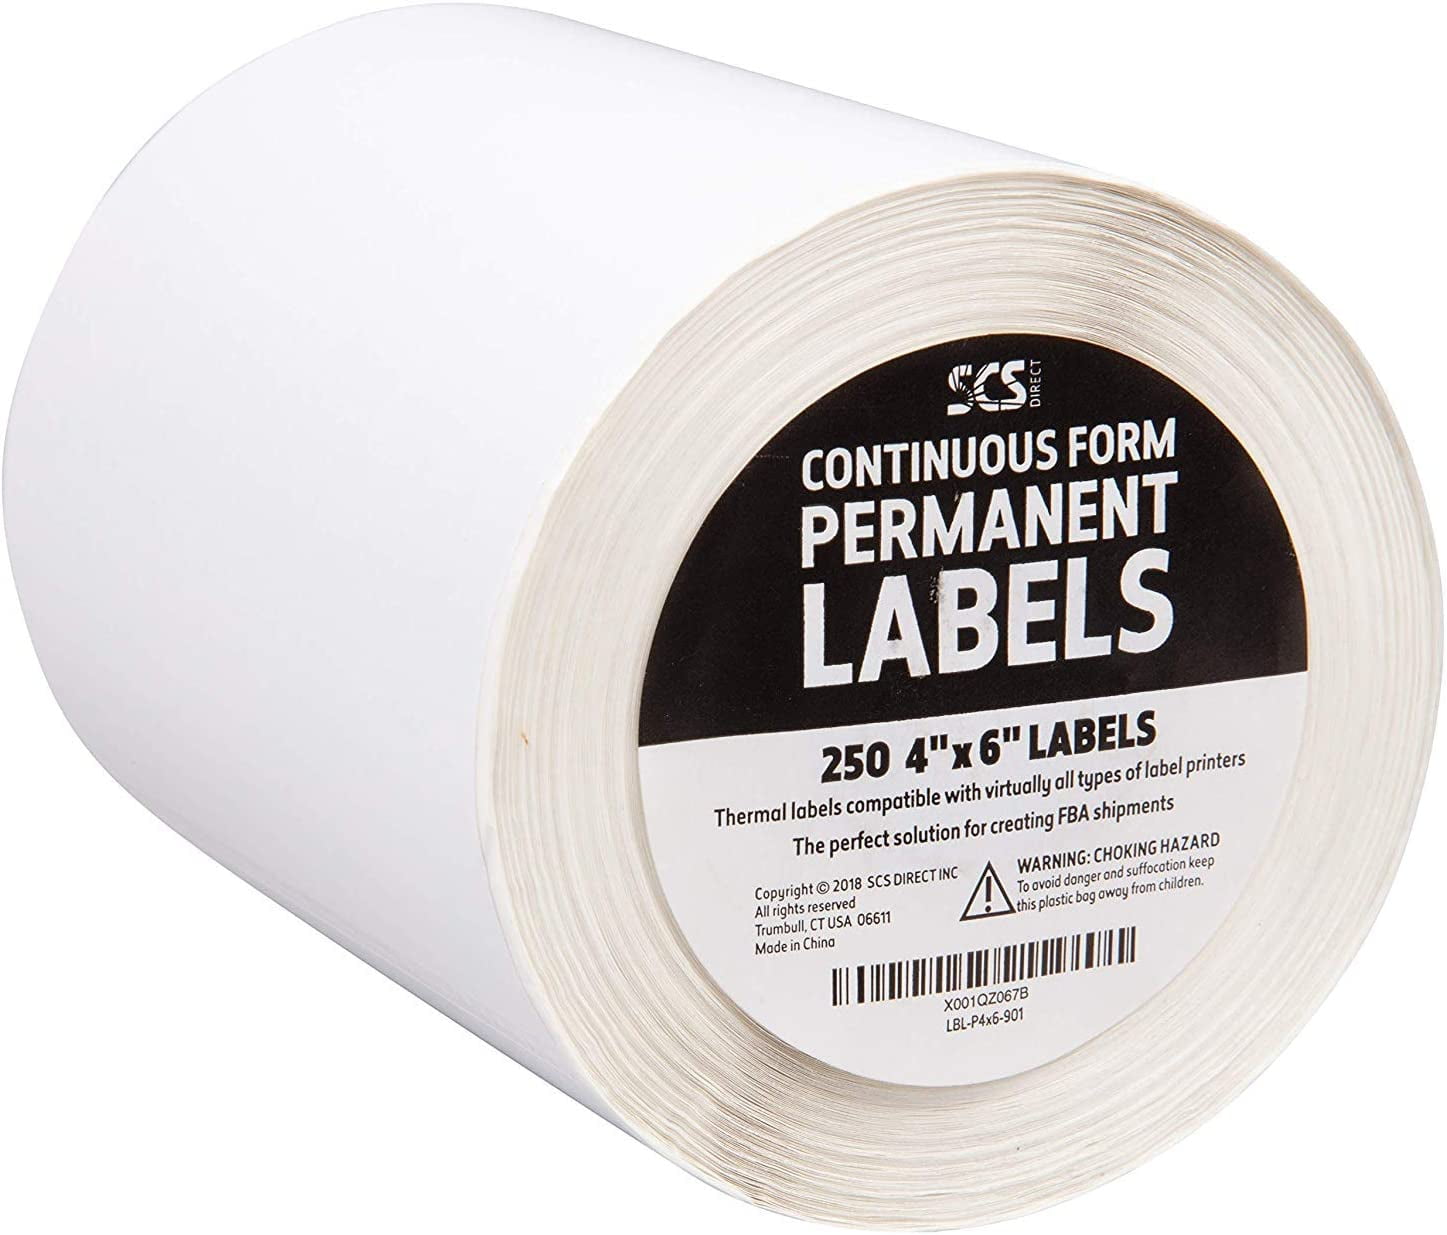 FBA Label Service Solutions